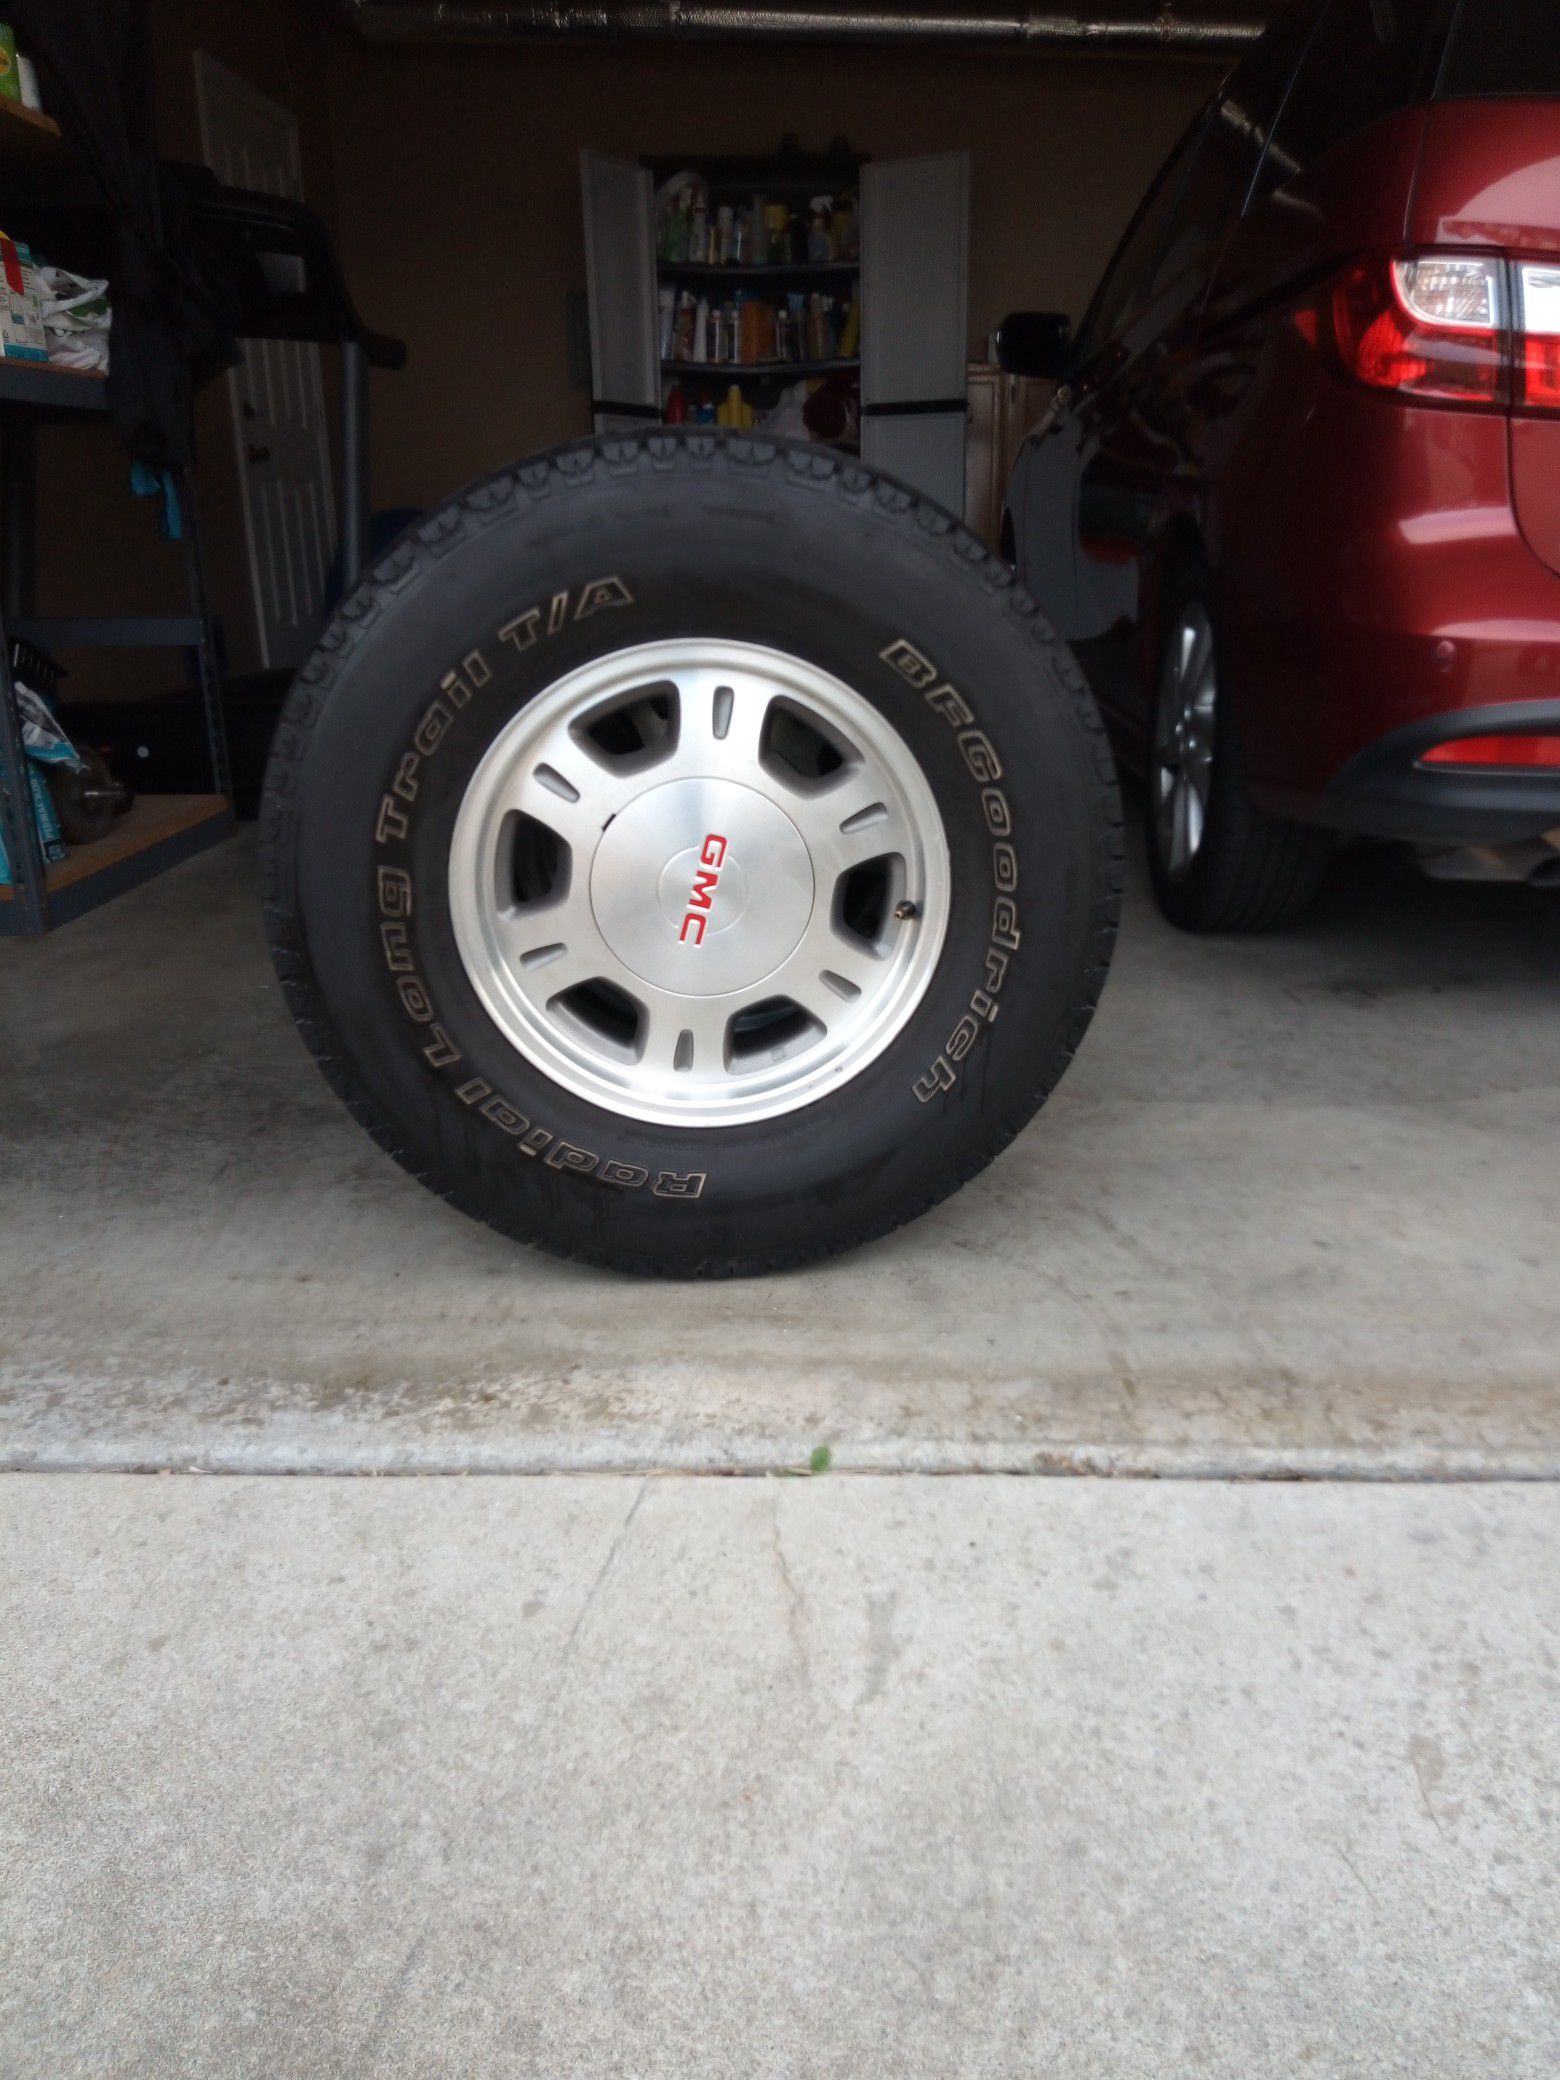 ,GMC wheels with tires in good condition